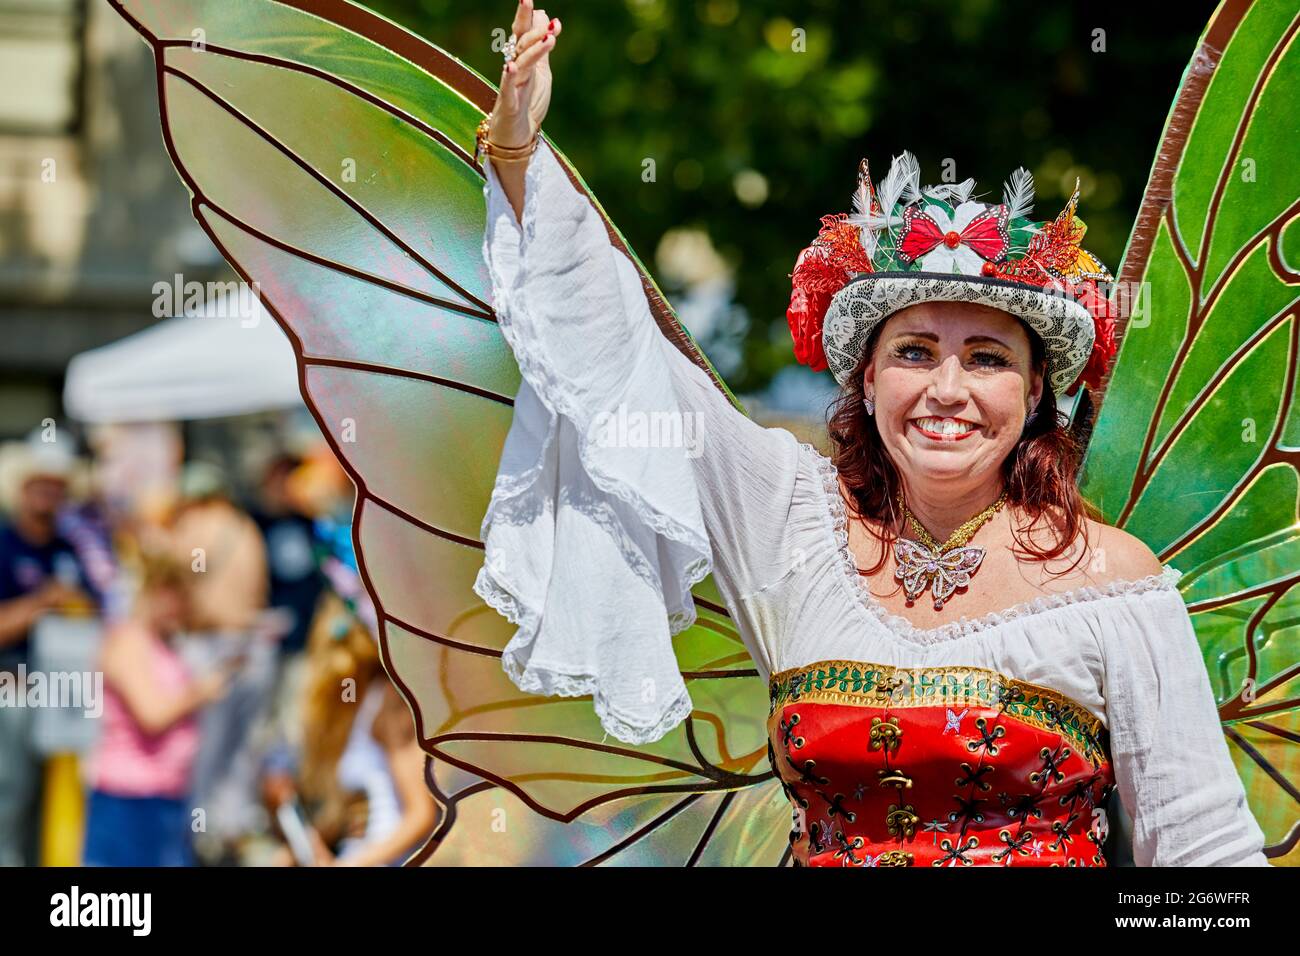 Prescott, Arizona, USA - July 3, 2021: Woman dressed in a butterfly costume with wings waving to the spectators in the 4th of July parade Stock Photo